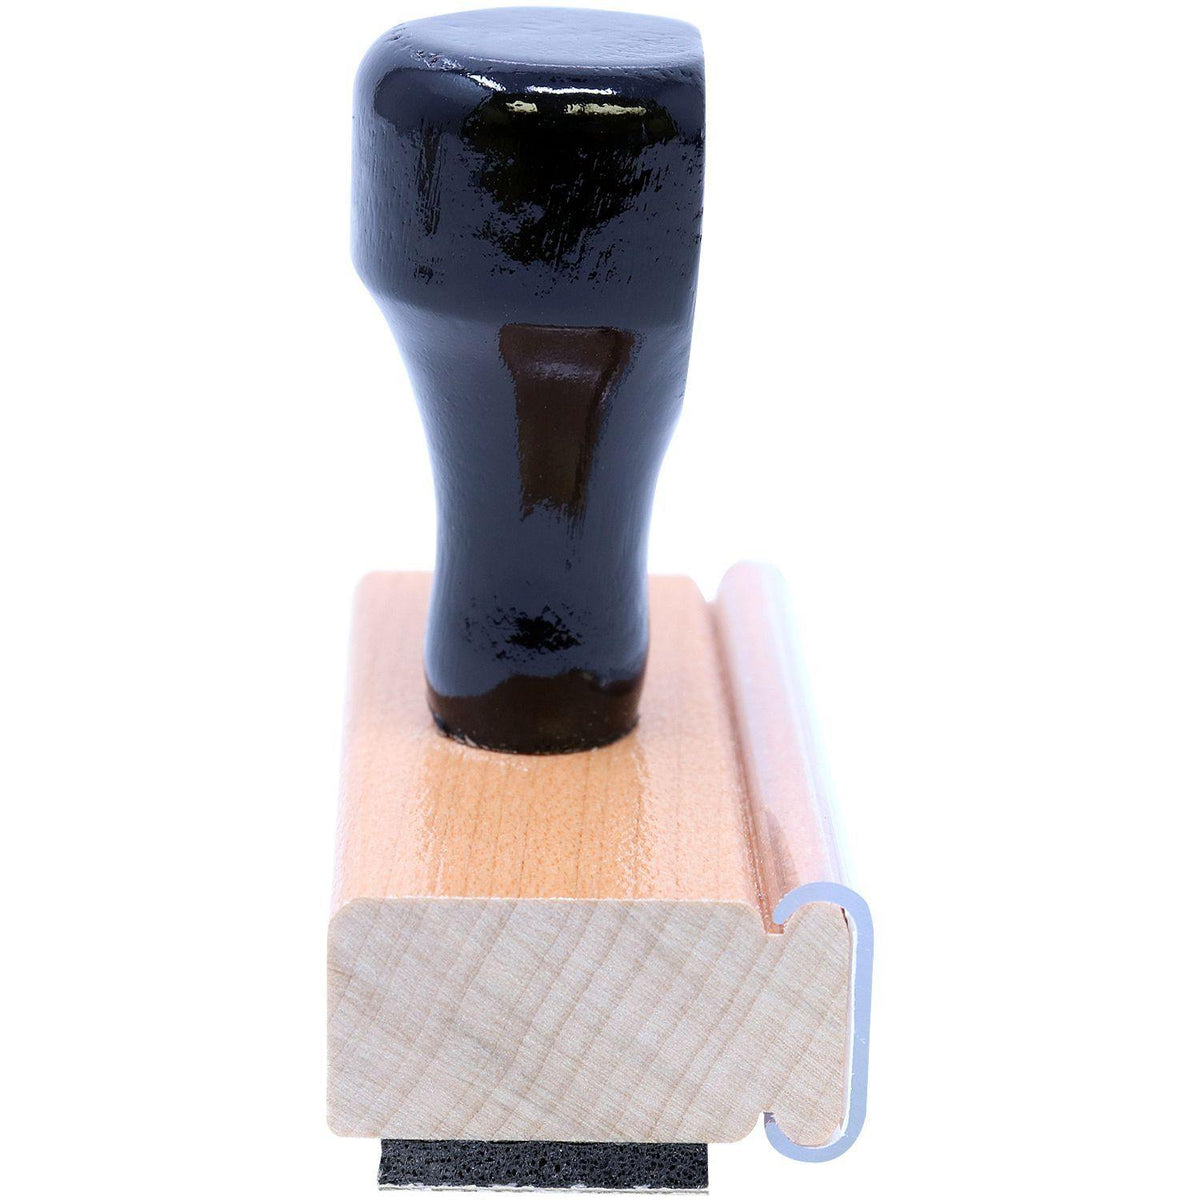 Side View of Large Atencion Inmediata Rubber Stamp Alt 1